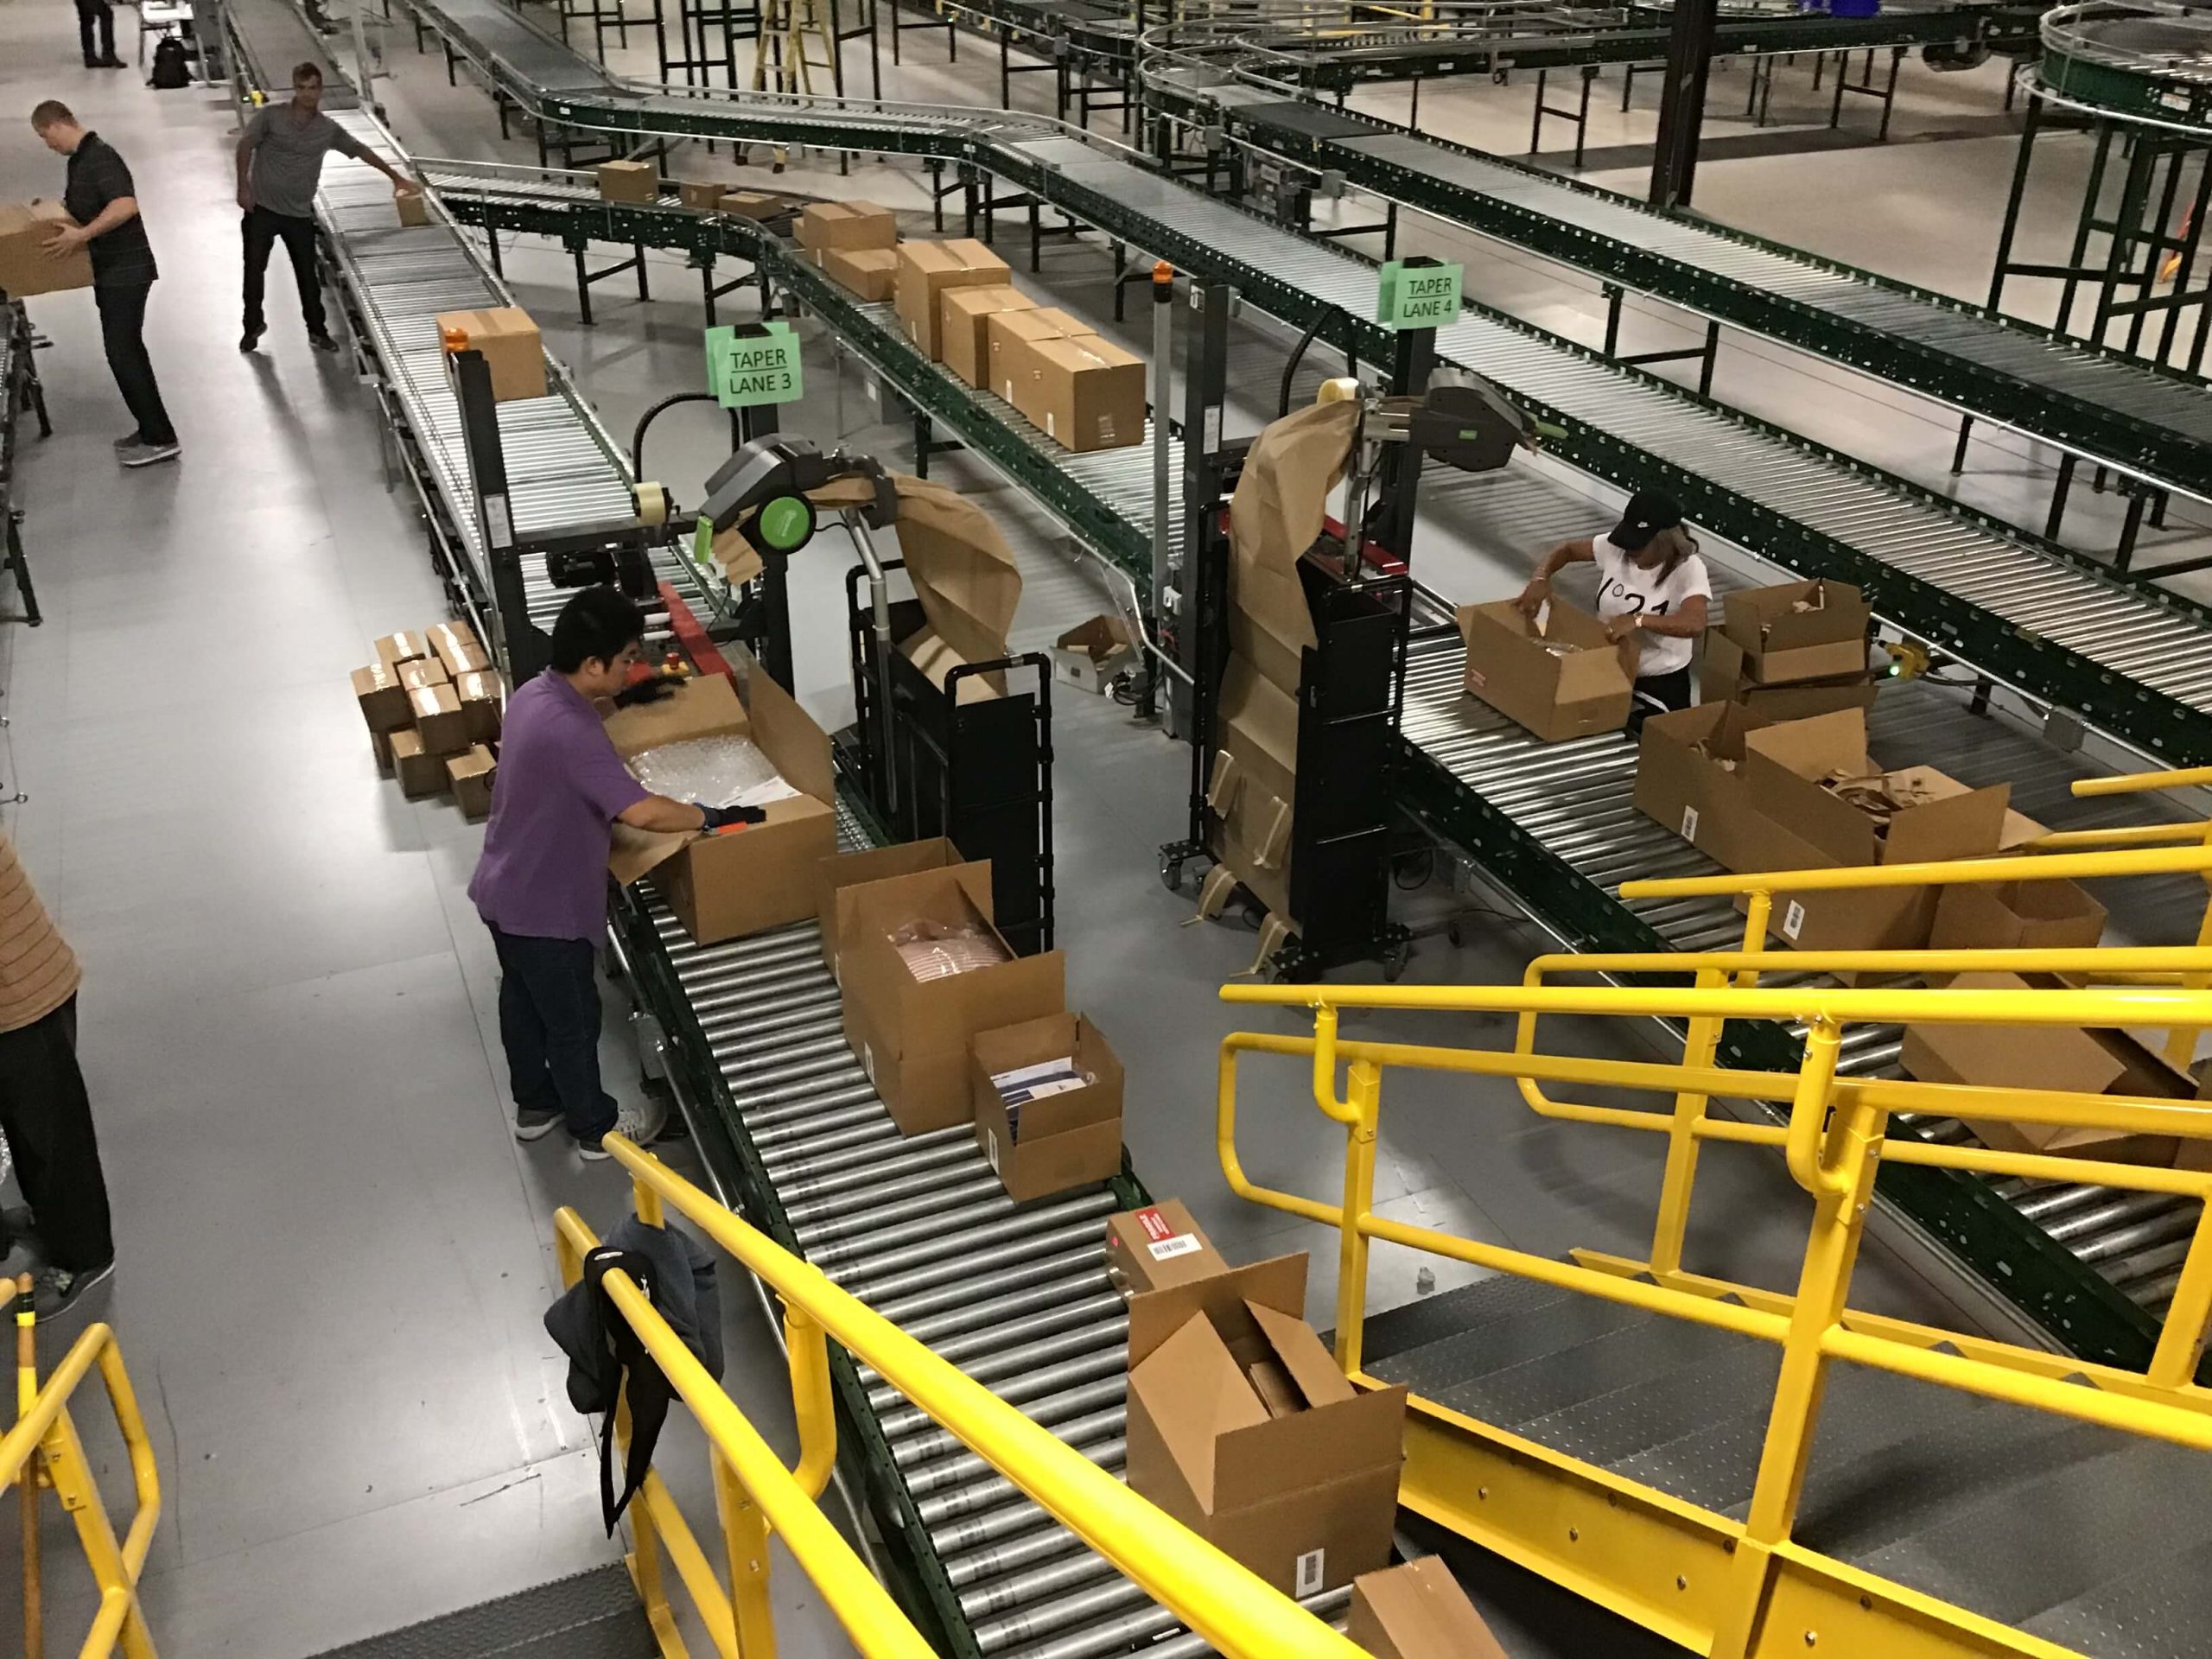 Workers filling cardboard boxes with paper on a conveyor line in warehouse